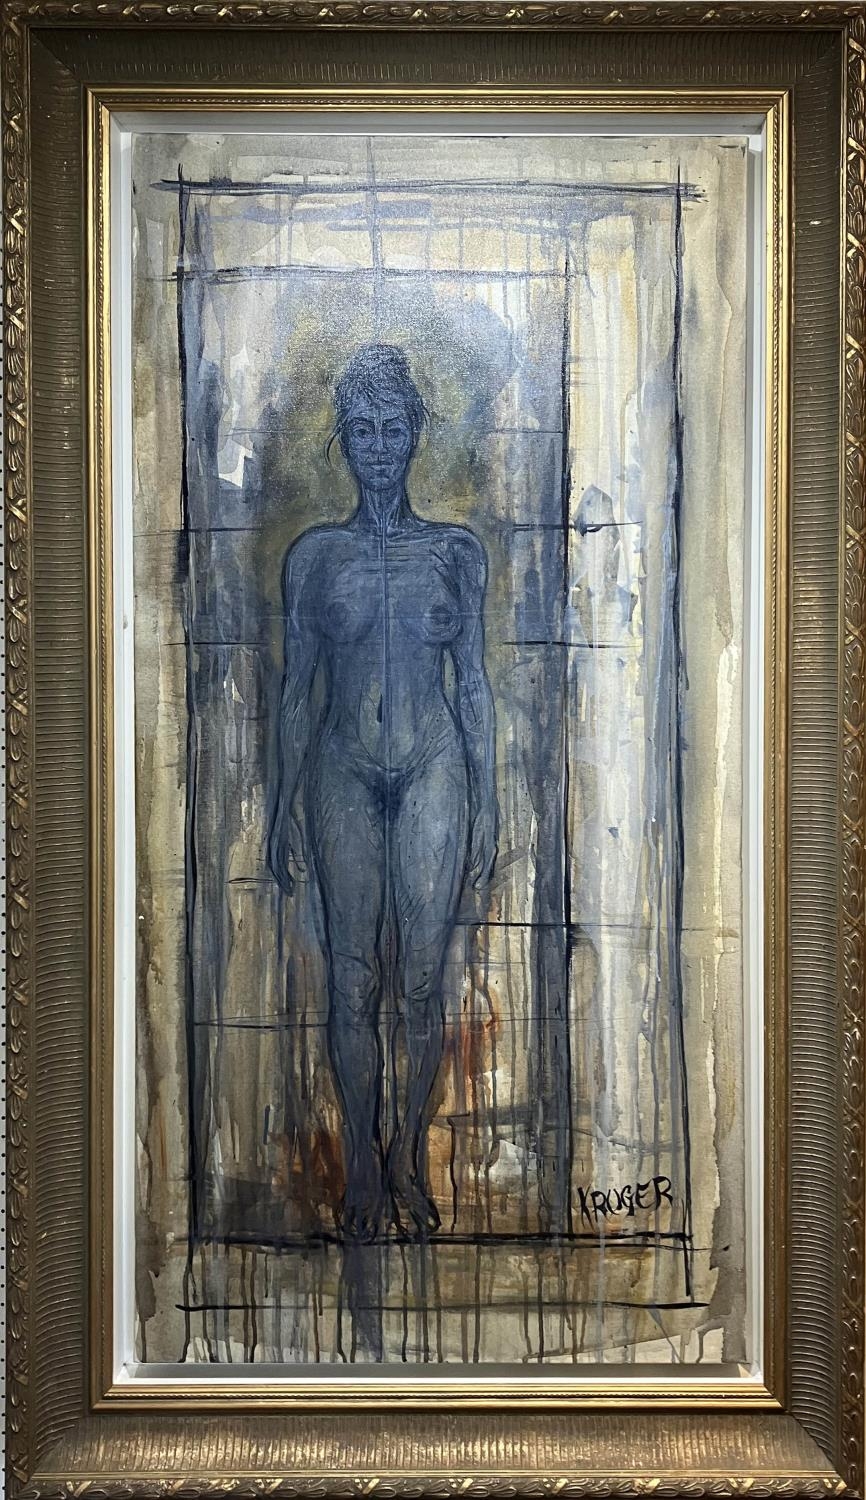 SEBASTIAN KRUGER, 'Nude Study', oil on canvas, 122cm x 61cm, signed, framed. (Subject to ARR - see